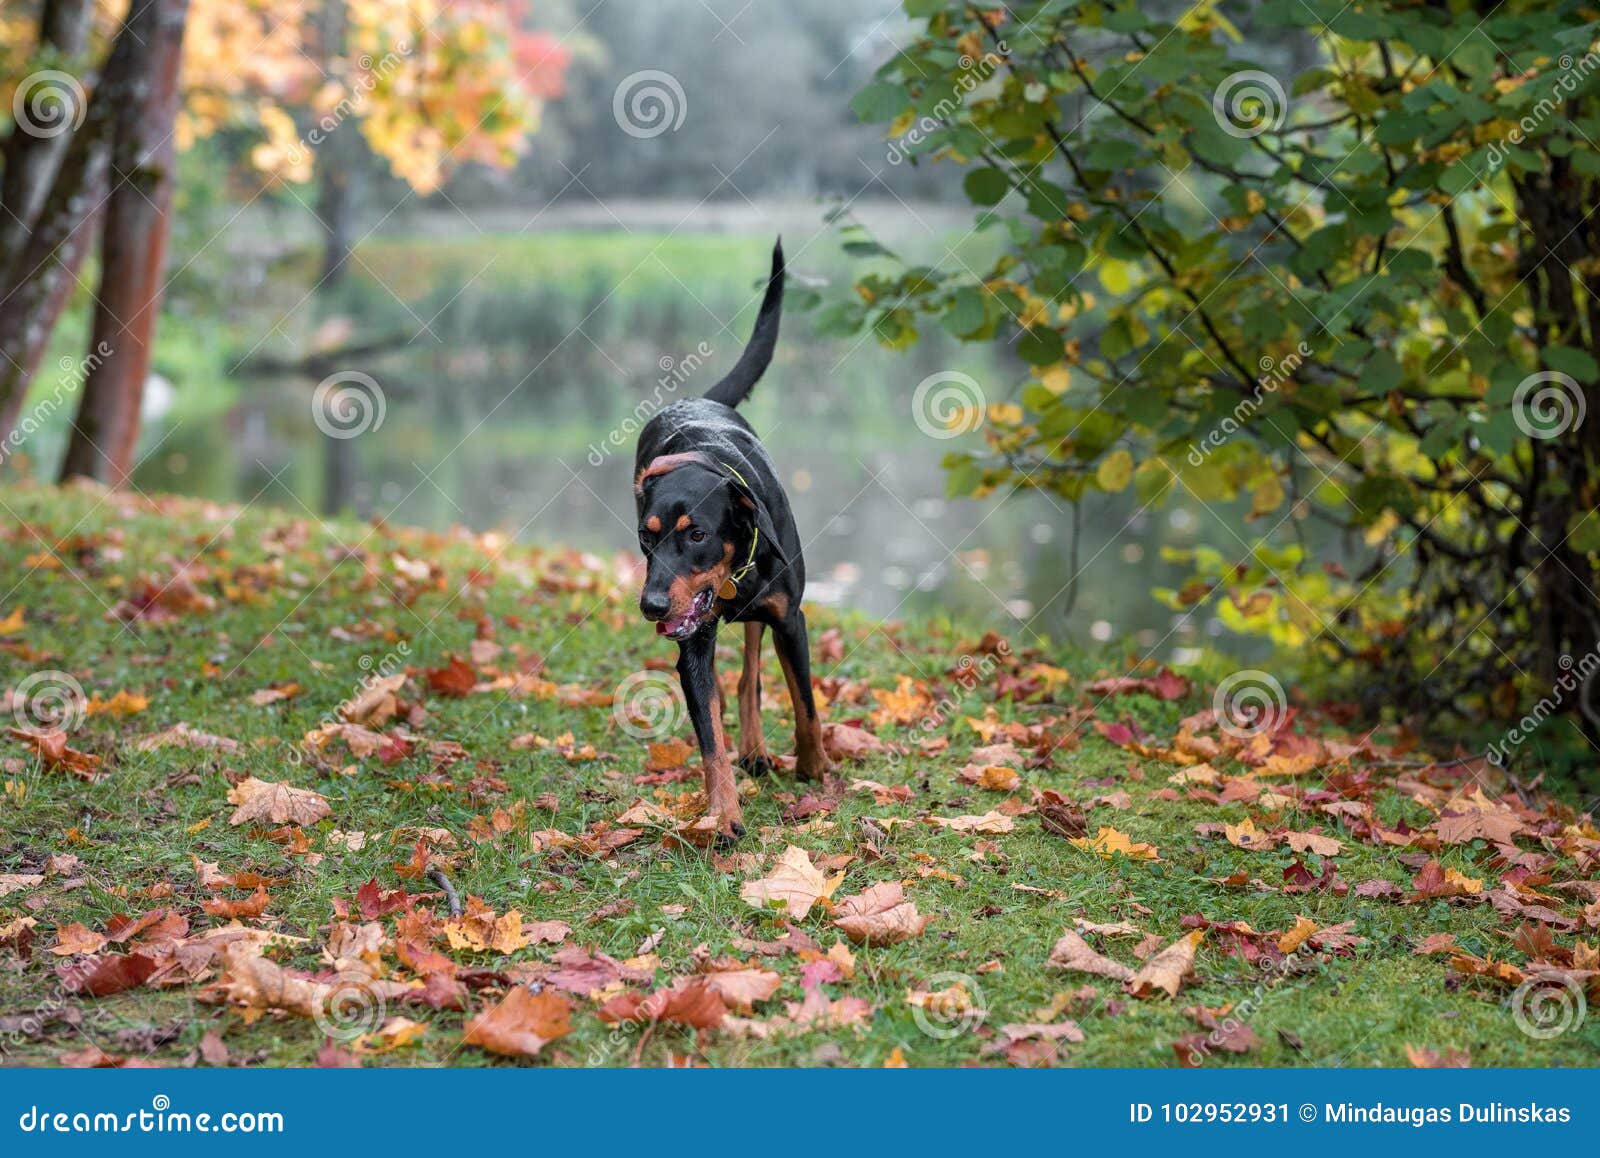 Lithuanian Hound Dog Autumn Leaves In Background Stock Image Image Of Sitting Autumn 102952931